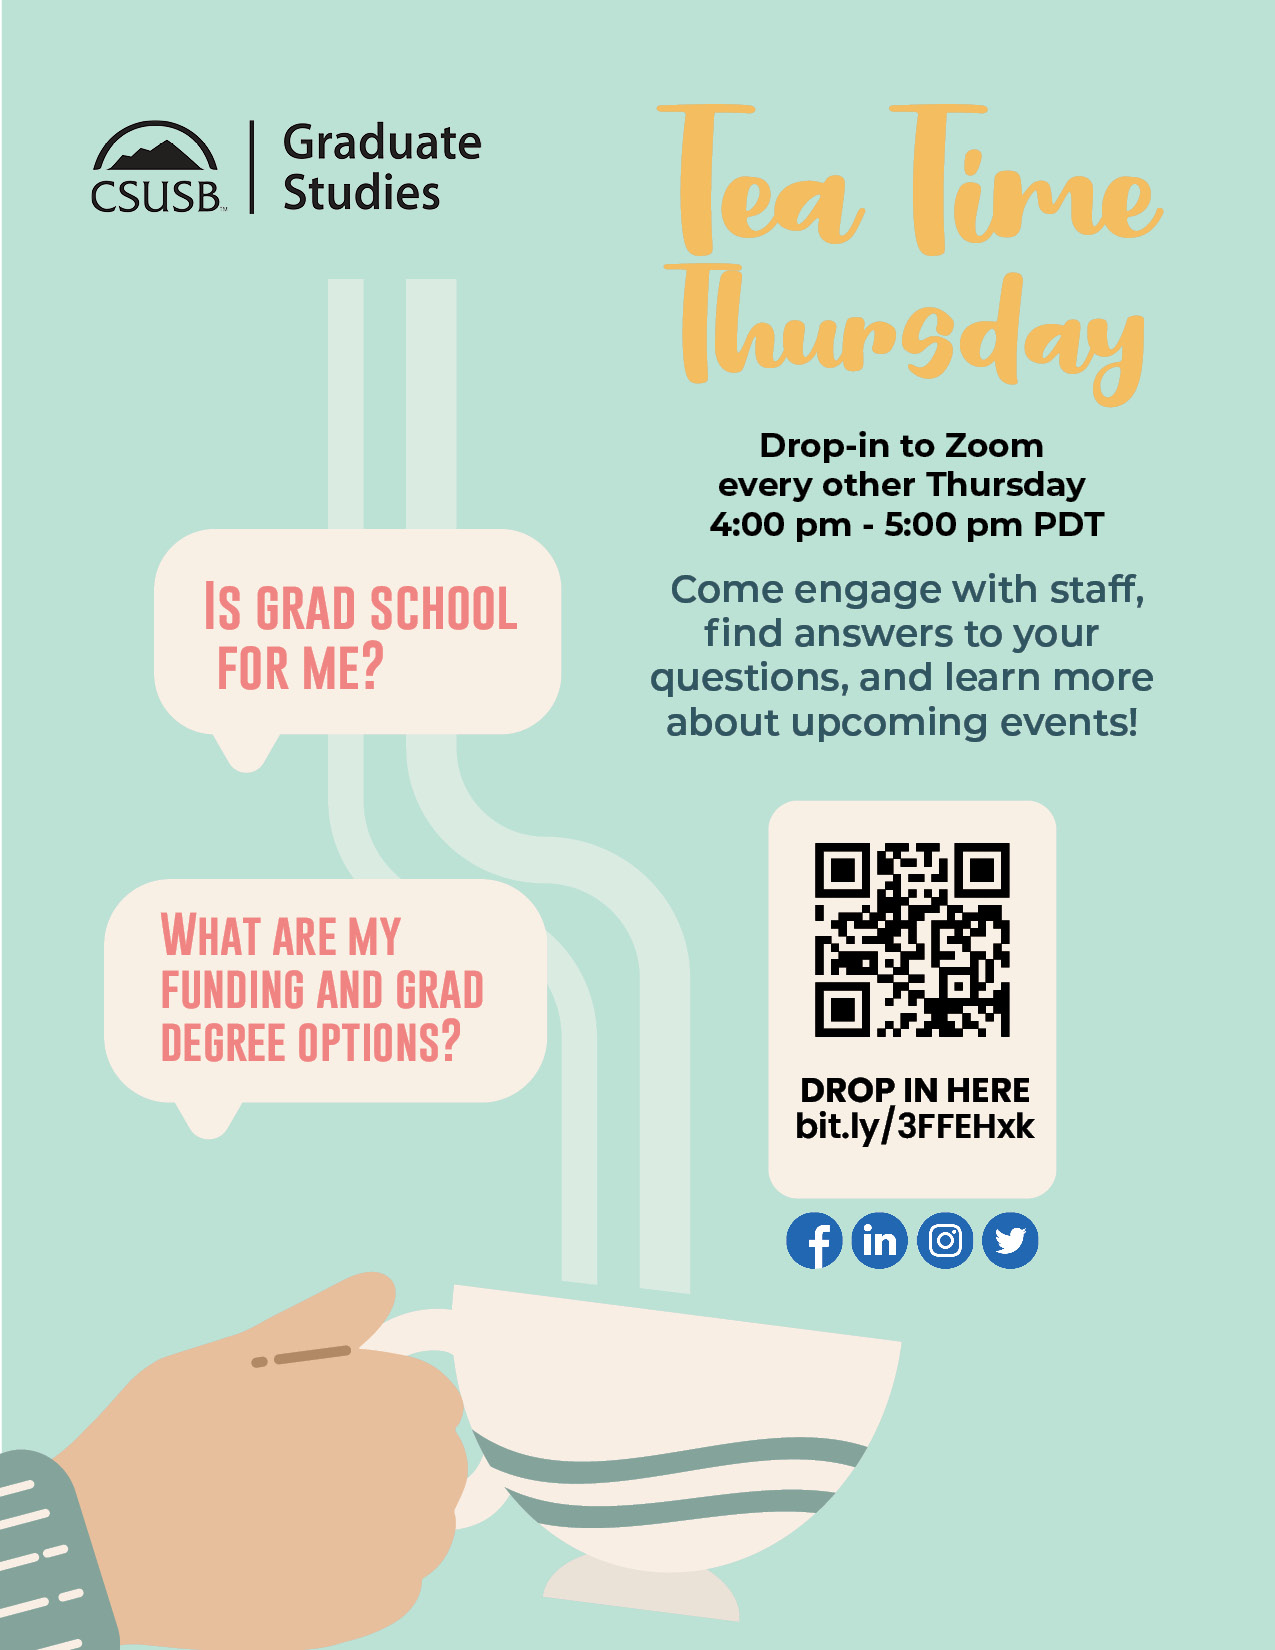 Grab yourself a cup of tea and chat about Grad school at CSUSB!